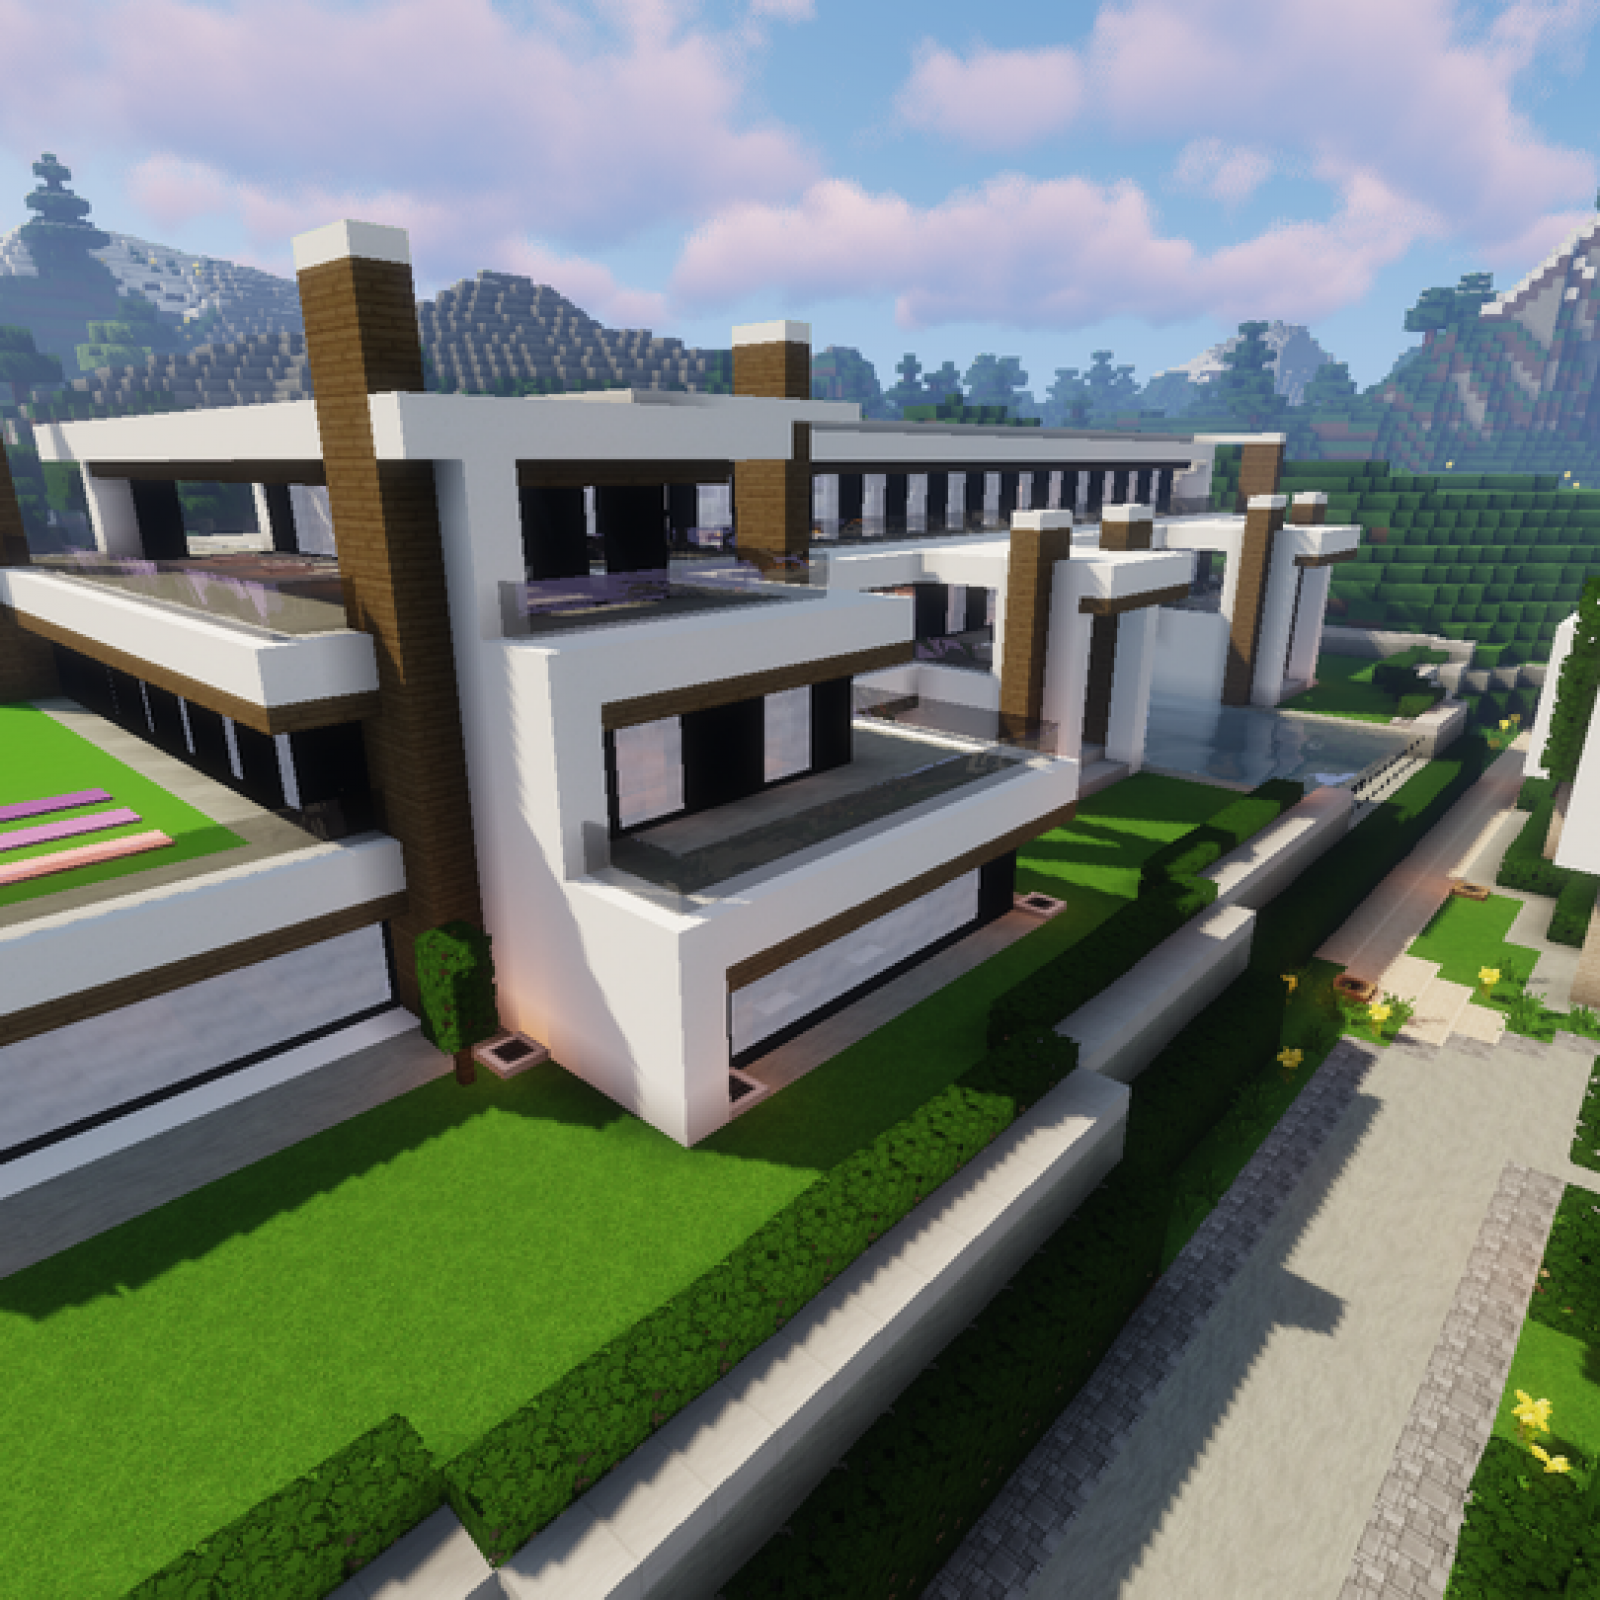 16 Top Breathtaking Minecraft Building Ideas Houses Images - Minecraft